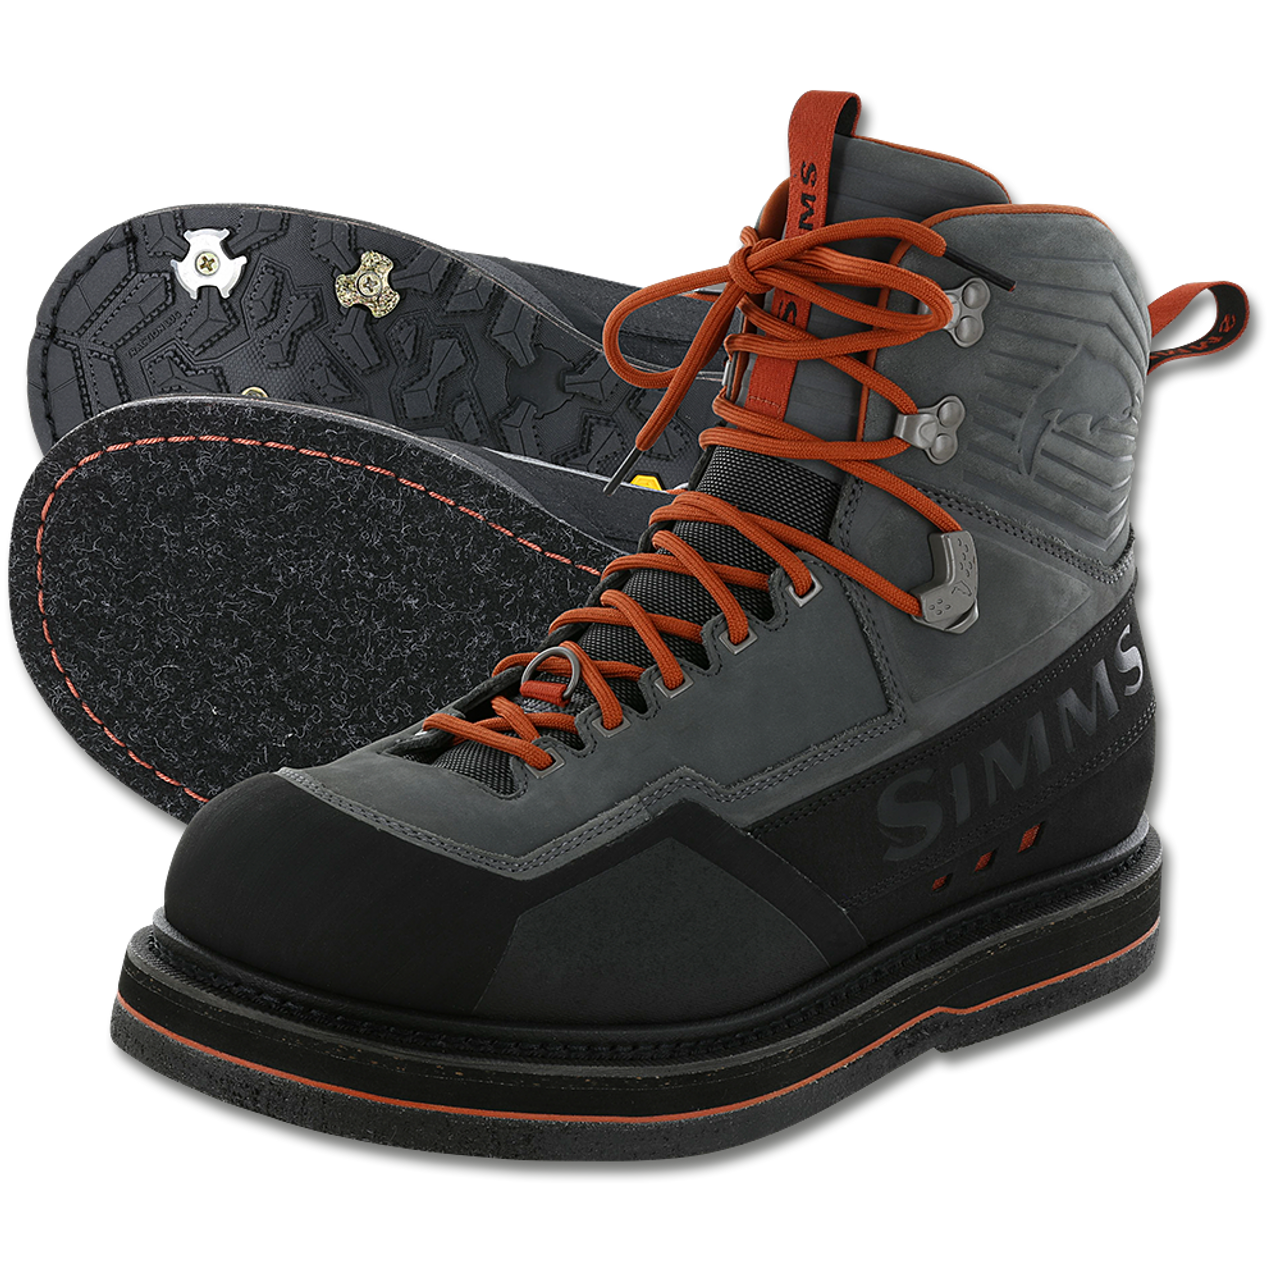 Simms G3 Guide Boot - The Fly Shop